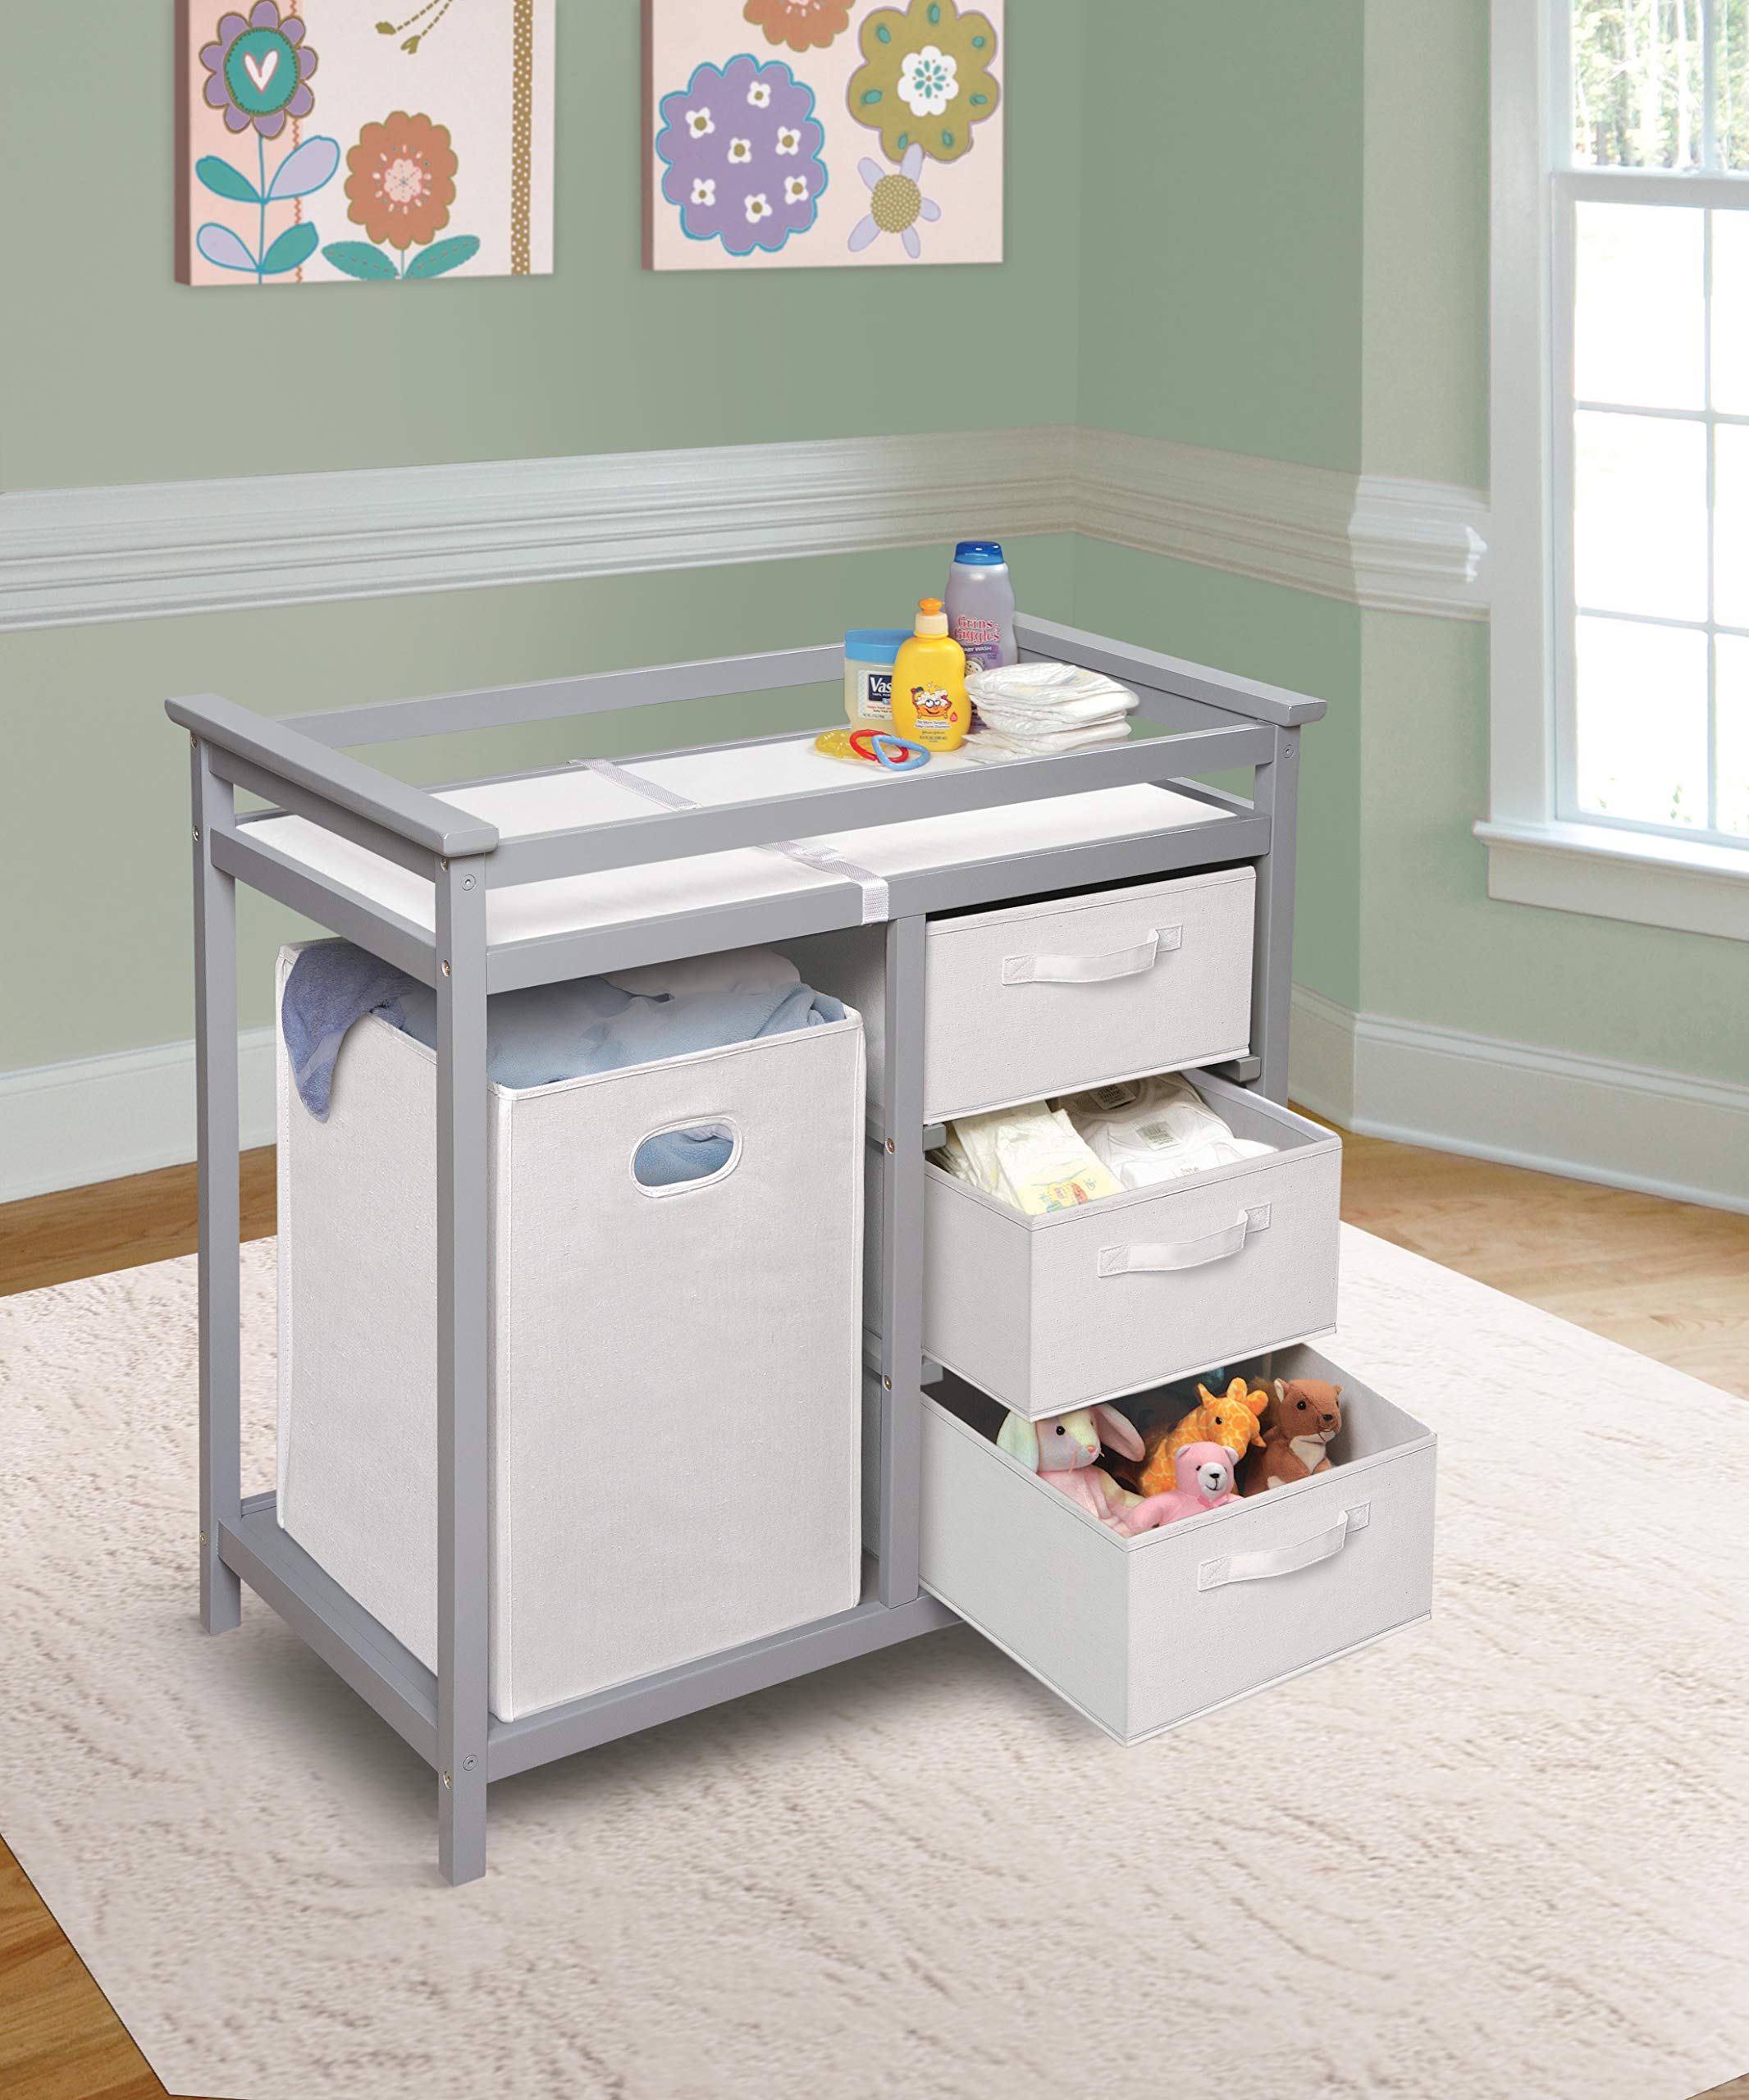 Badger Basket Modern Baby Changing Table with Laundry Hamper, 3 Storage Drawers, and Pad - Cool Gray